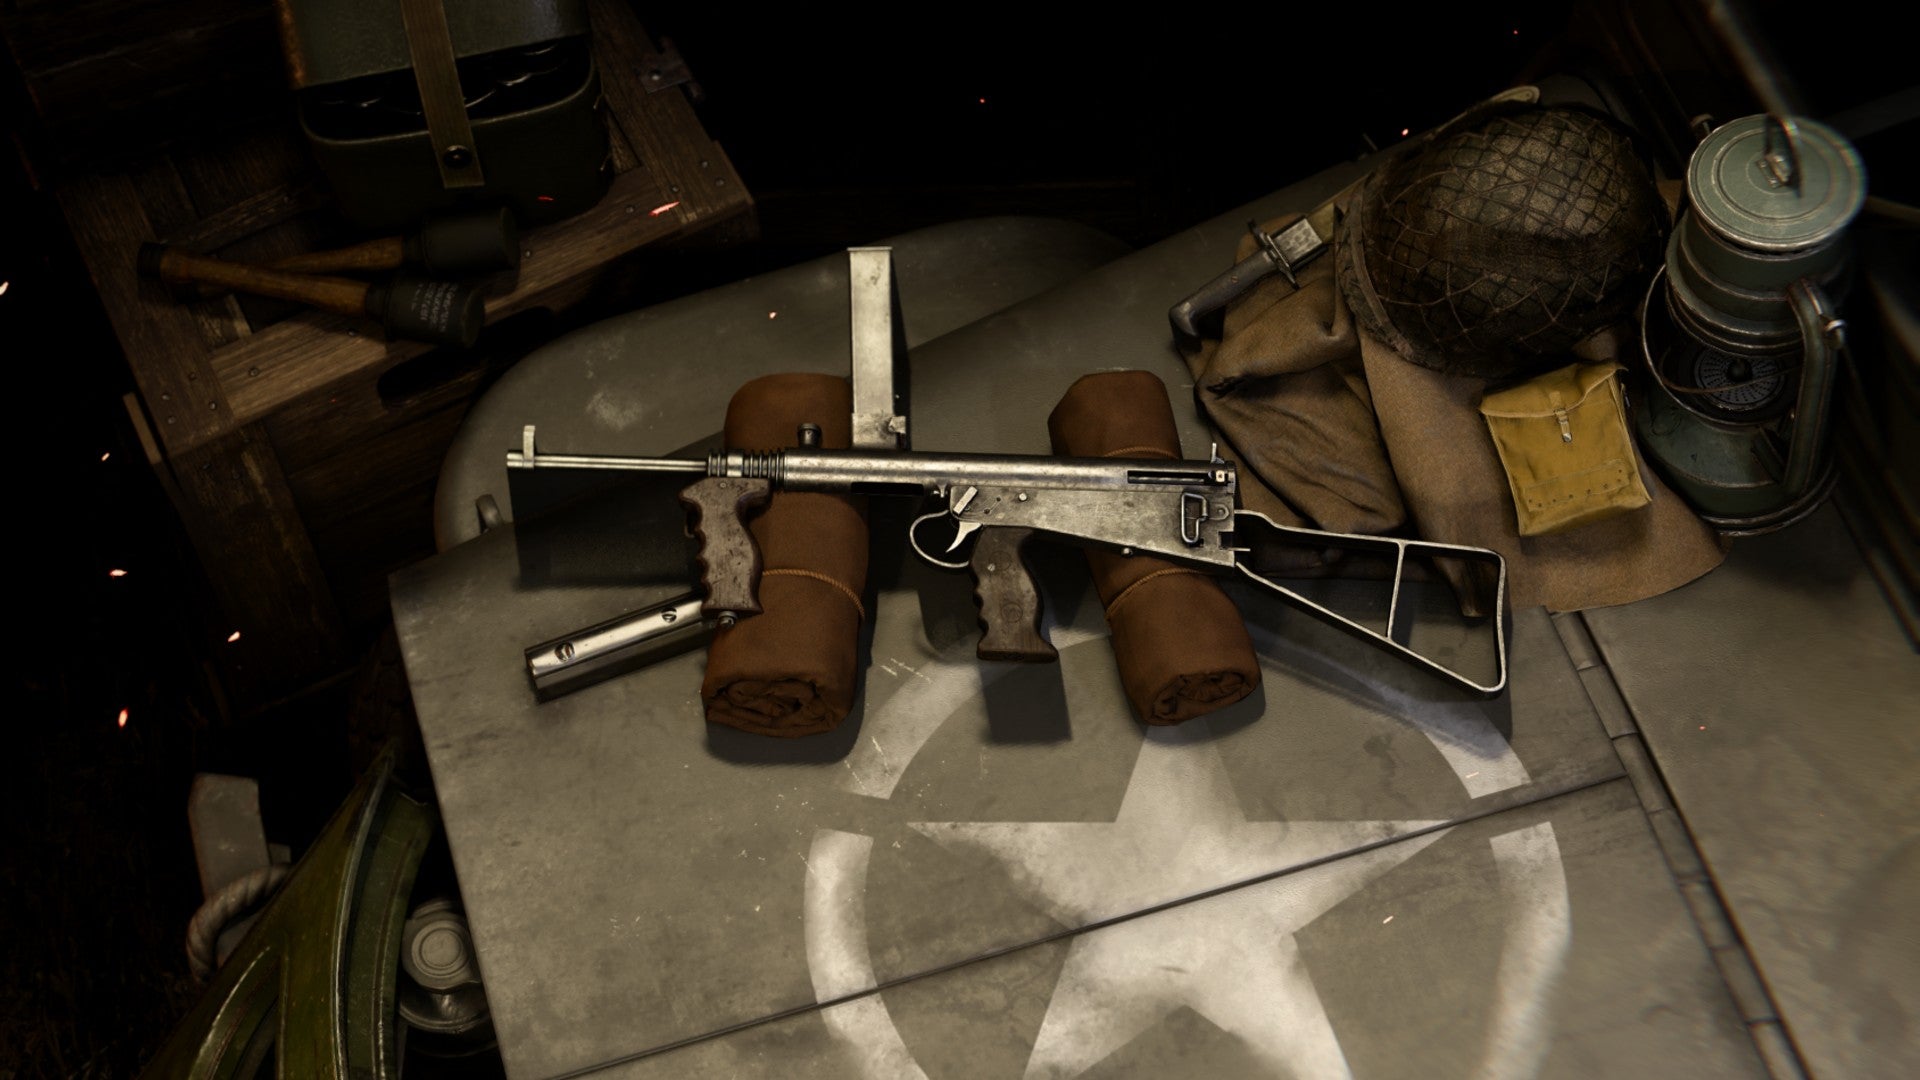 Owen Gun in the Vanguard weapon gunsmith loadout screen, on a crate surrounded with other weapons, explosives, and armour